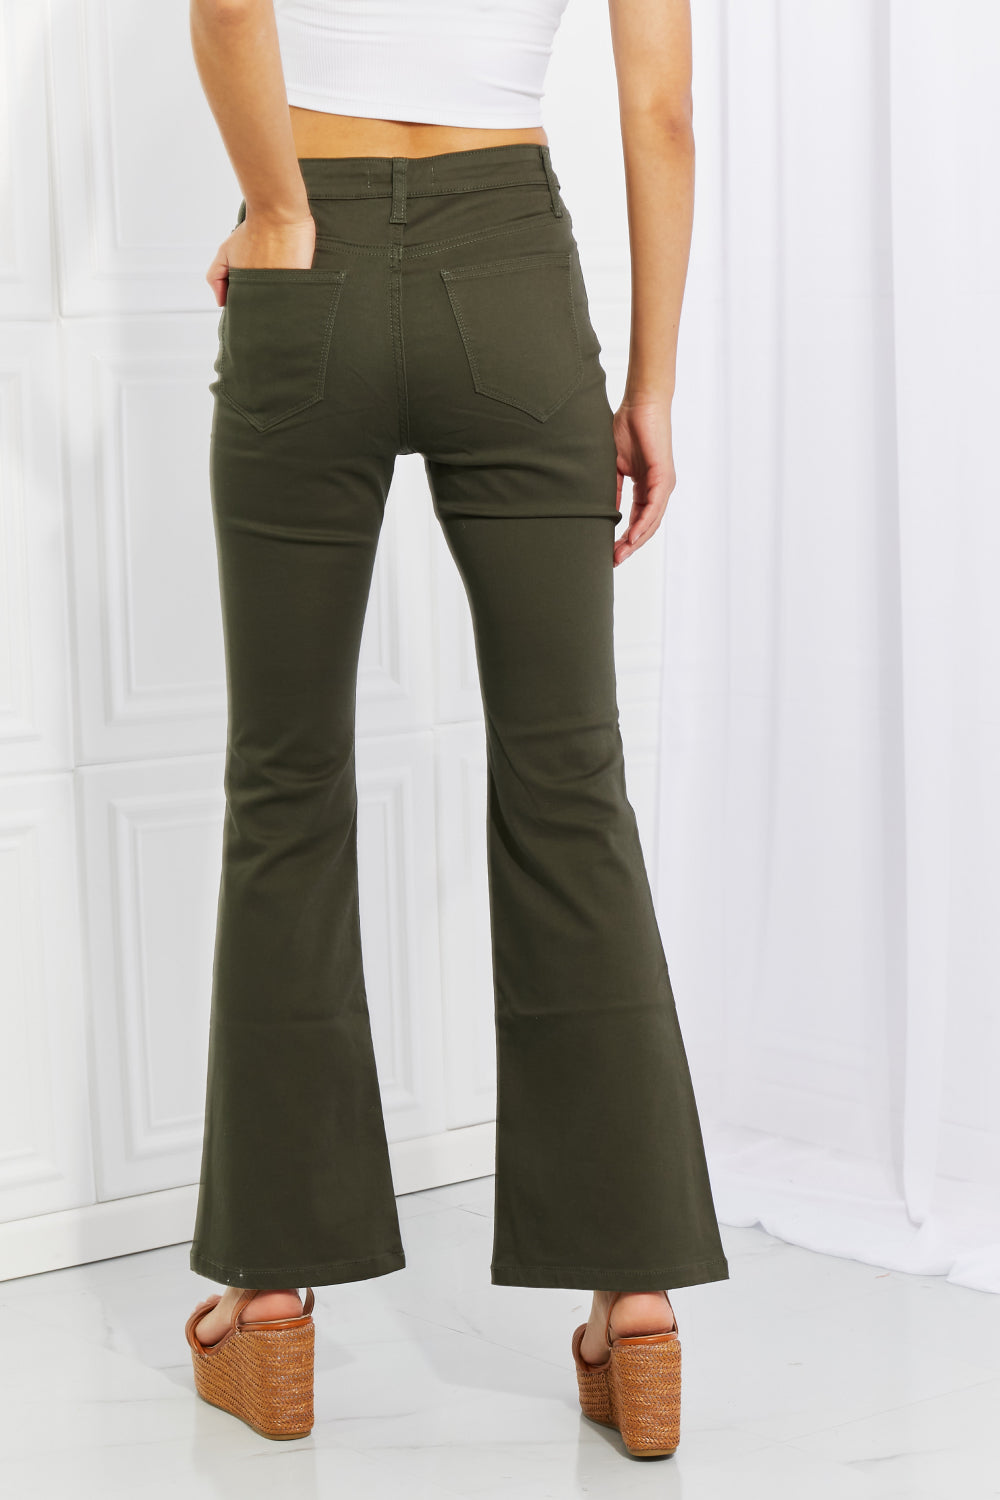 Zenana Clementine High-Rise Bootcut Pants in Dark Olive  Southern Soul Collectives 